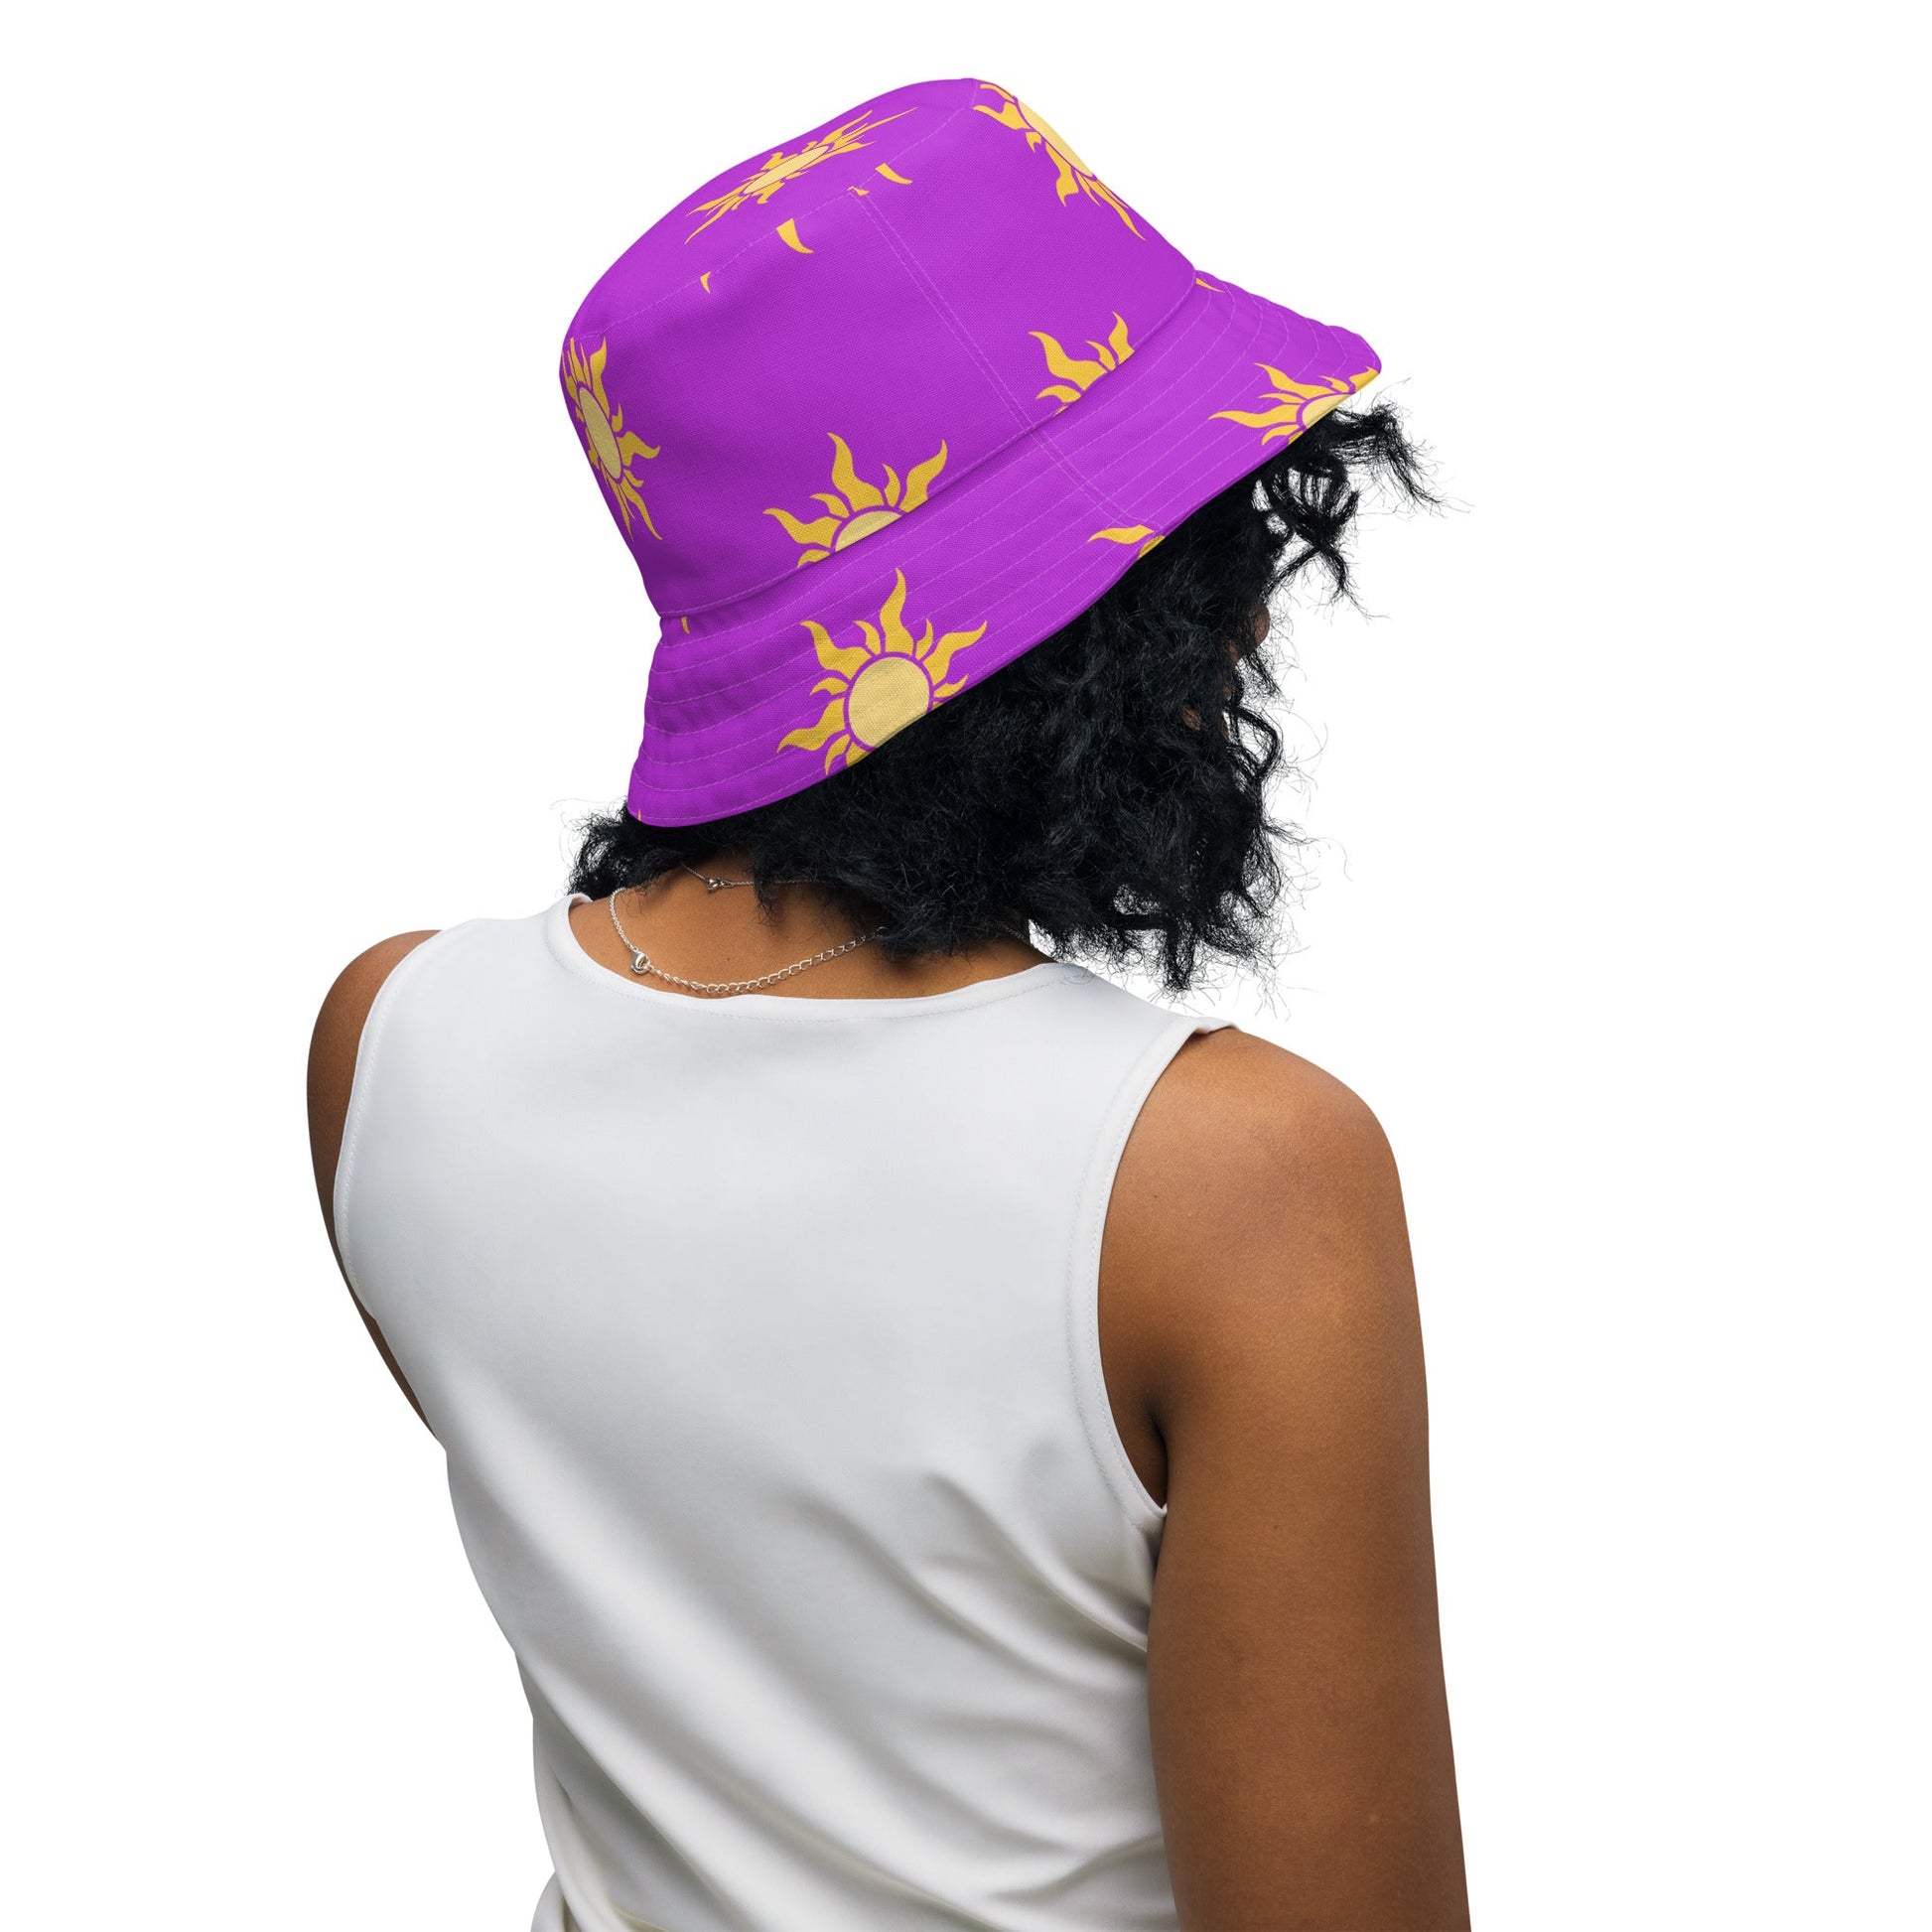 Let your light shine Reversible bucket hat castaway caydisney bucket hatdisney castaway cay style#tag4##tag5##tag6#